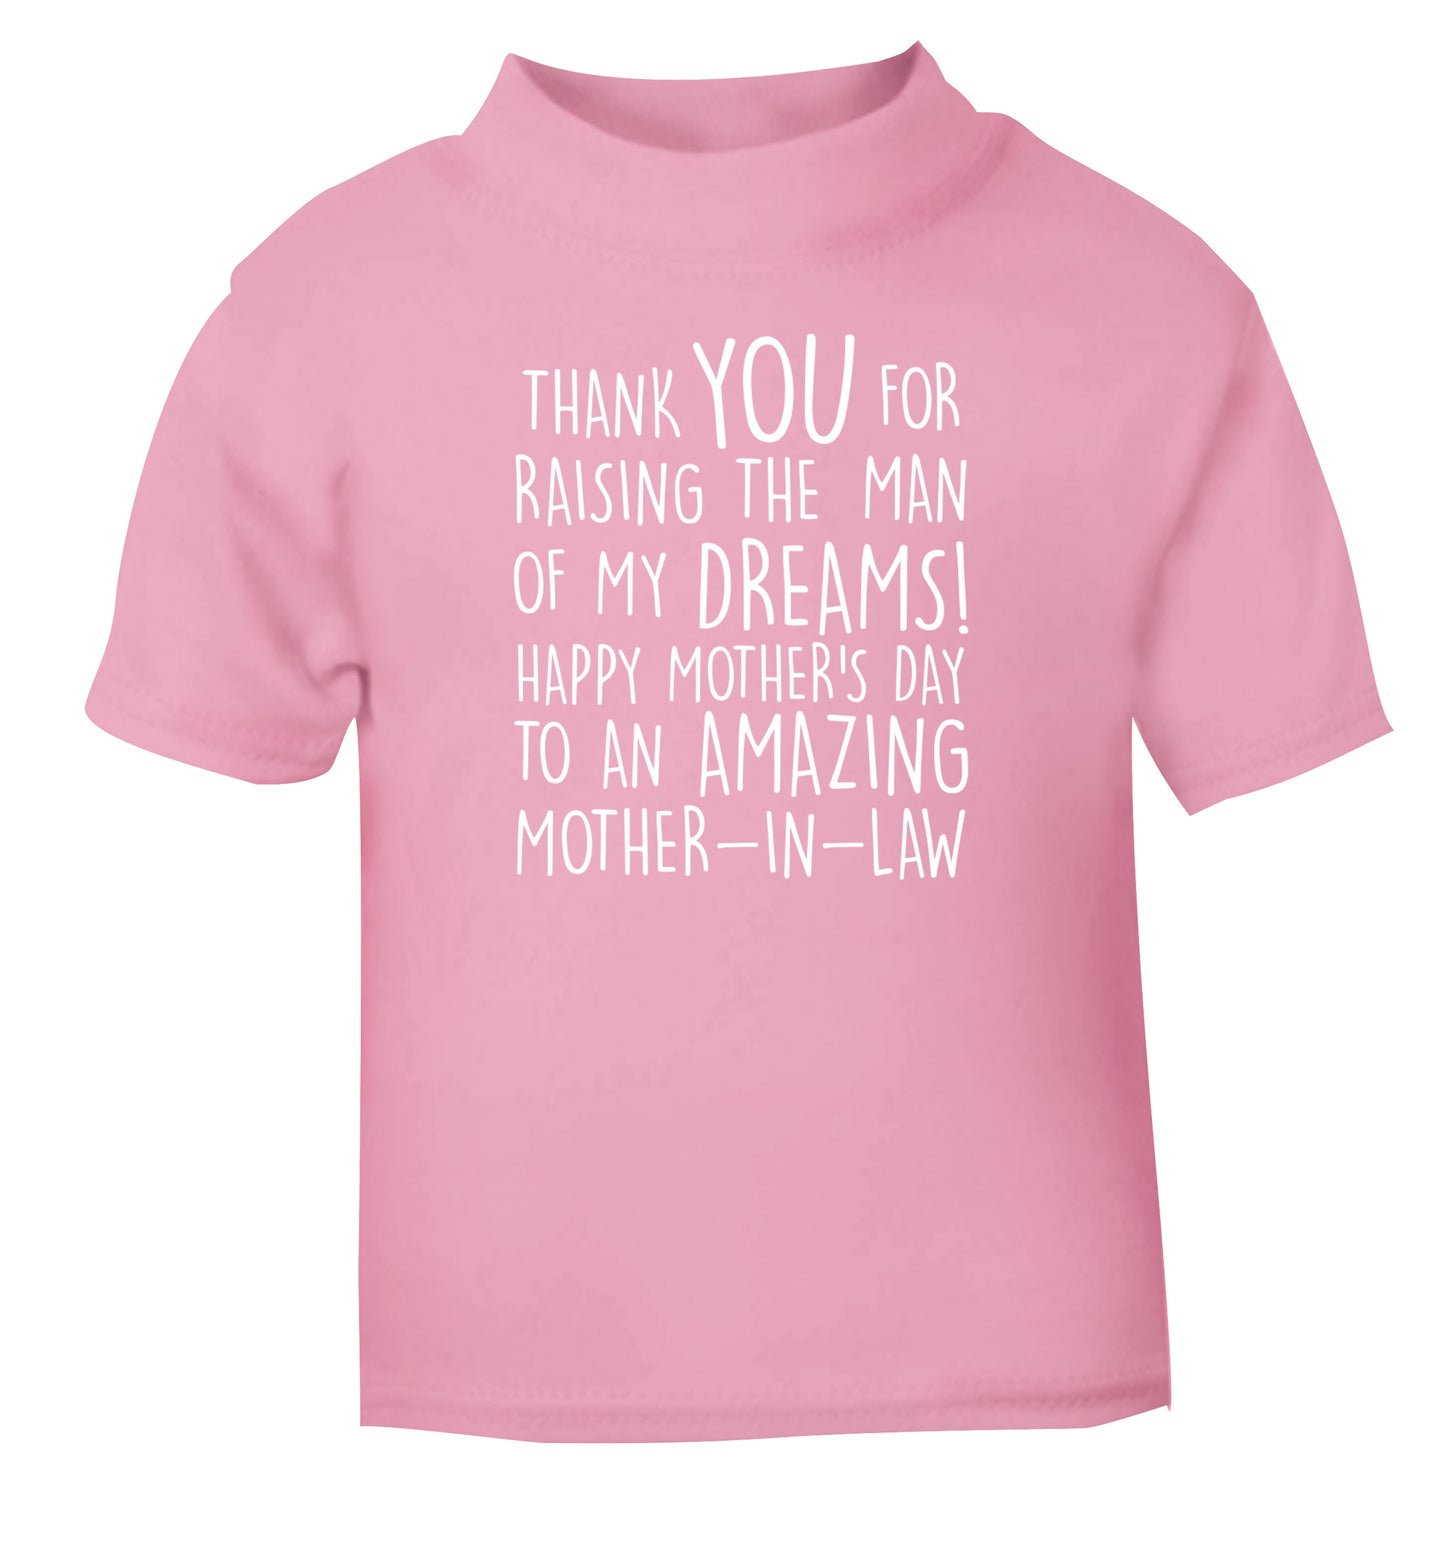 Raising the man of my dreams mother's day mother-in-law light pink baby toddler Tshirt 2 Years